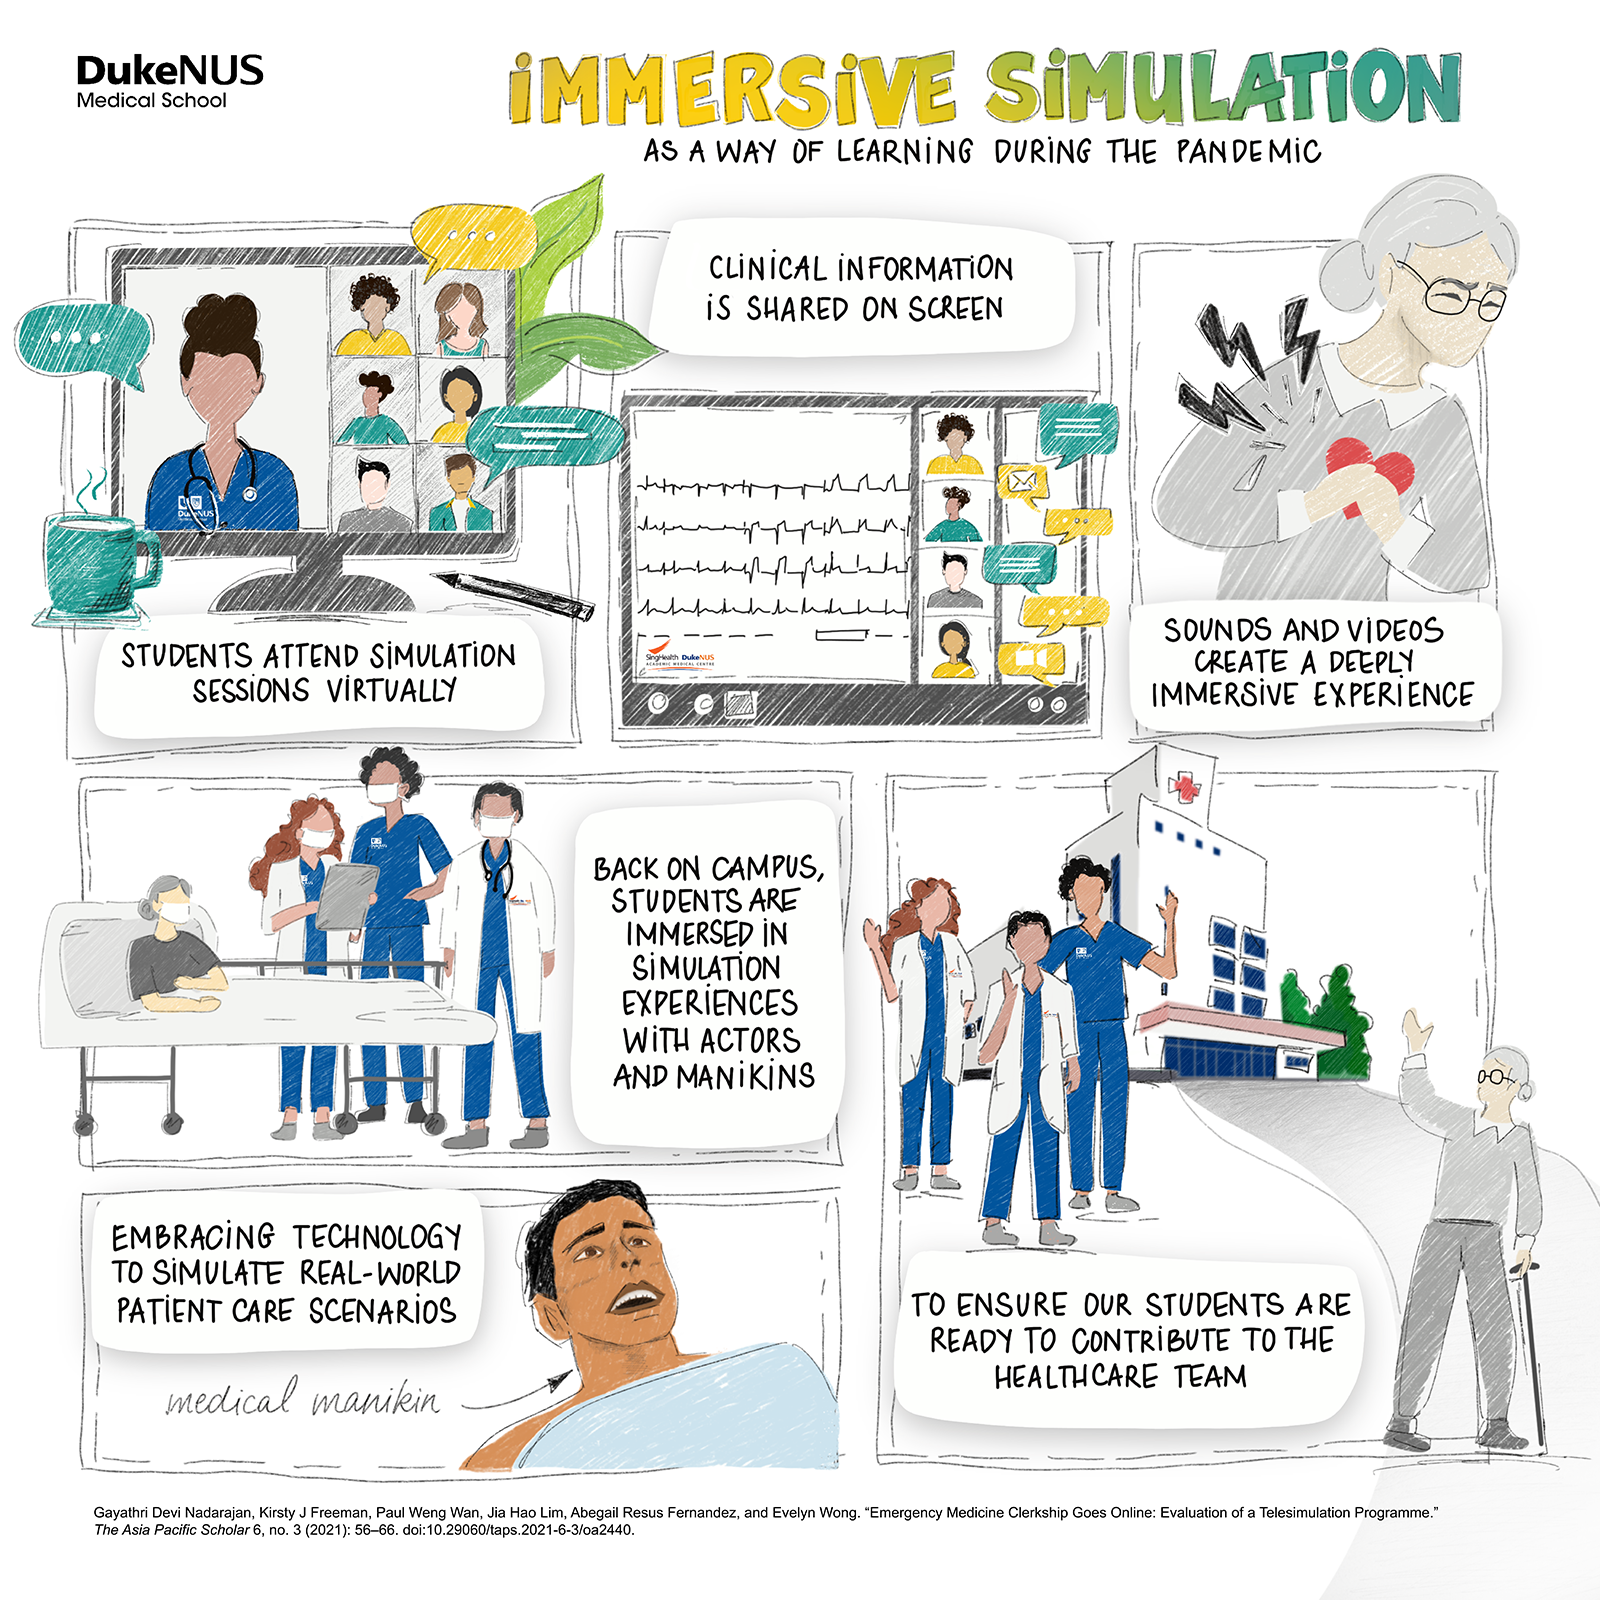 Using immersive simulations as education tools